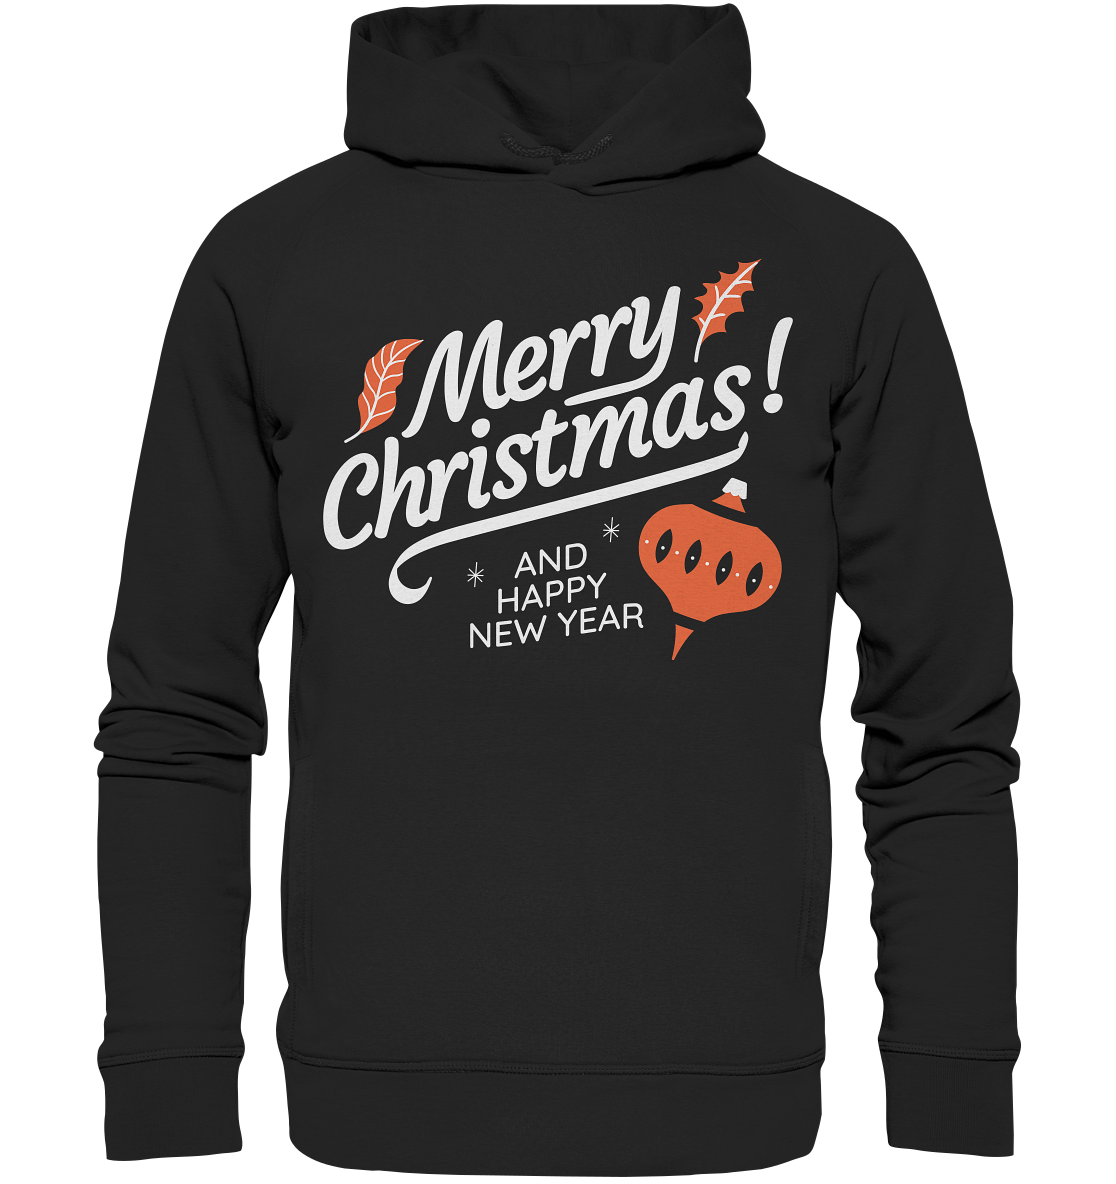 Merry Christmas and Happy New Year ,Merry Christmas and Happy New Year - Organic Fashion Hoodie